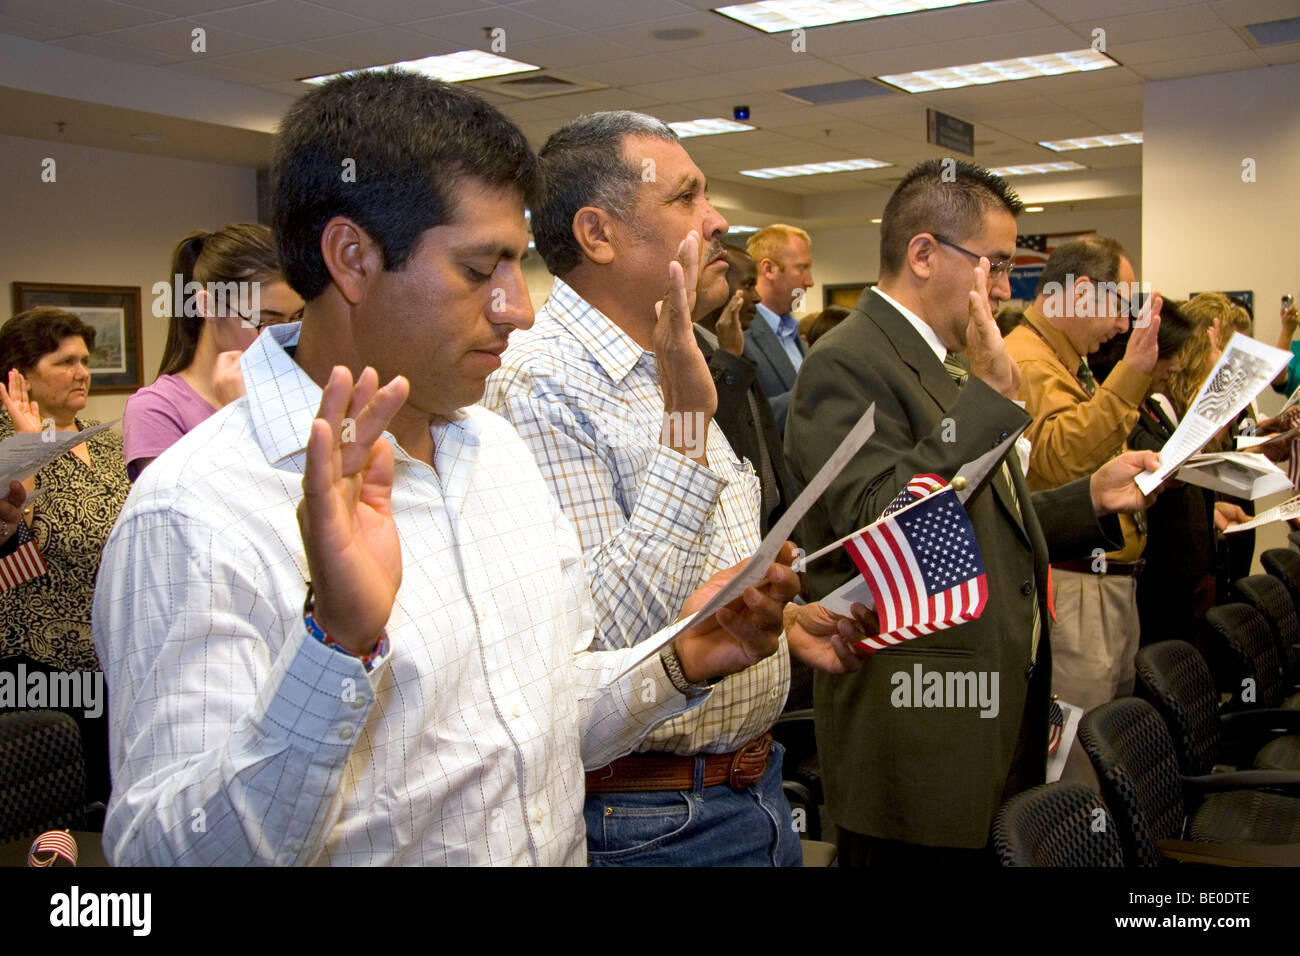 New United States citizens raise their right hand for citizenship oath ceremony in Idaho, USA. Stock Photo